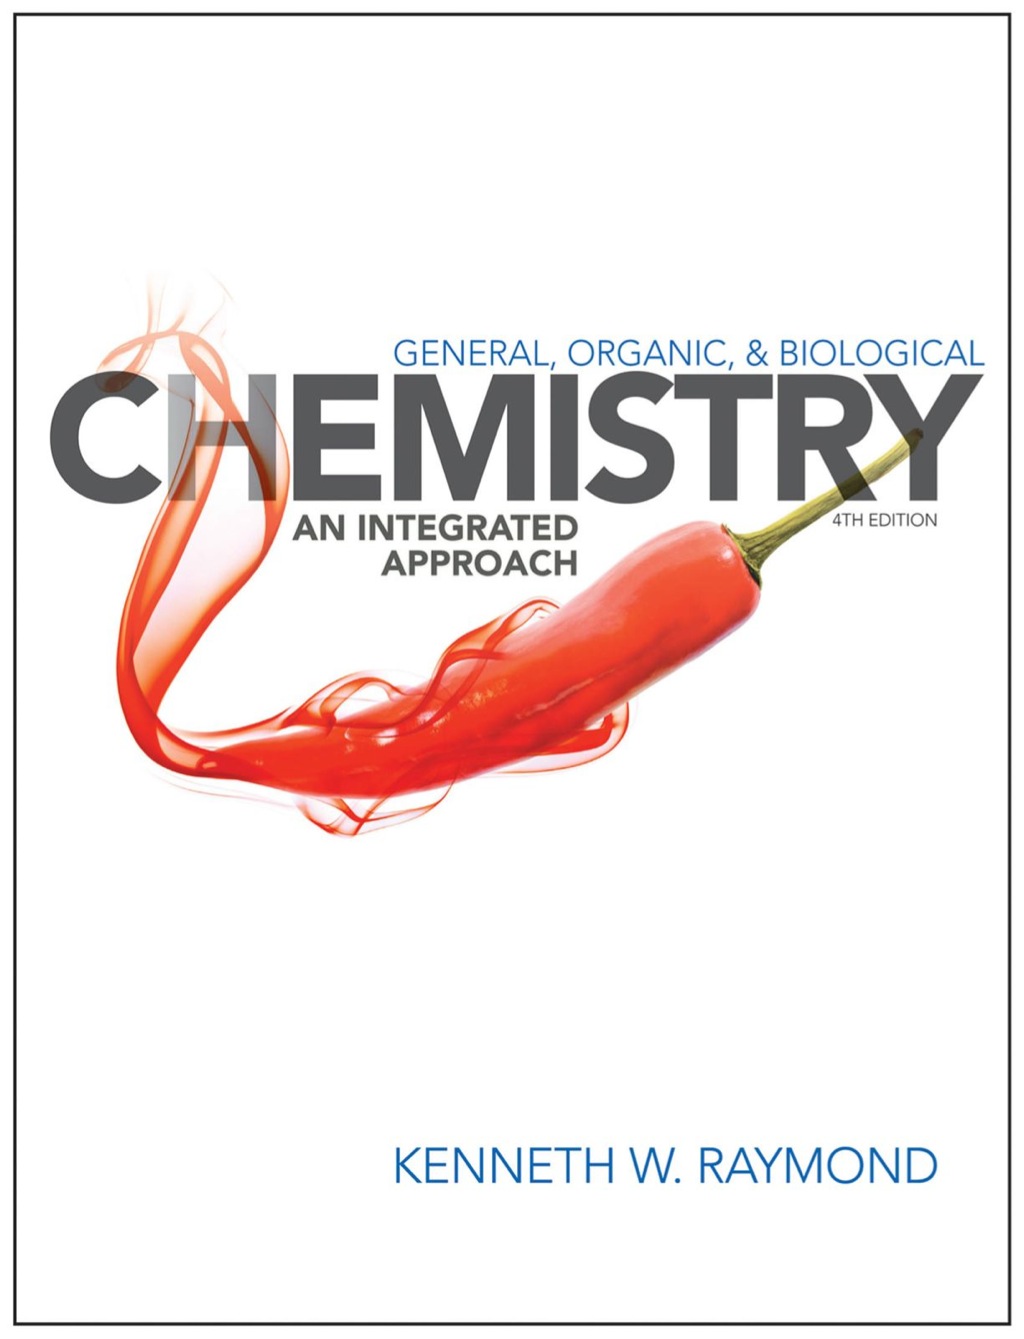 General Organic and Biological Chemistry: An Integrated Approach - 4th Edition (eBook Rental)